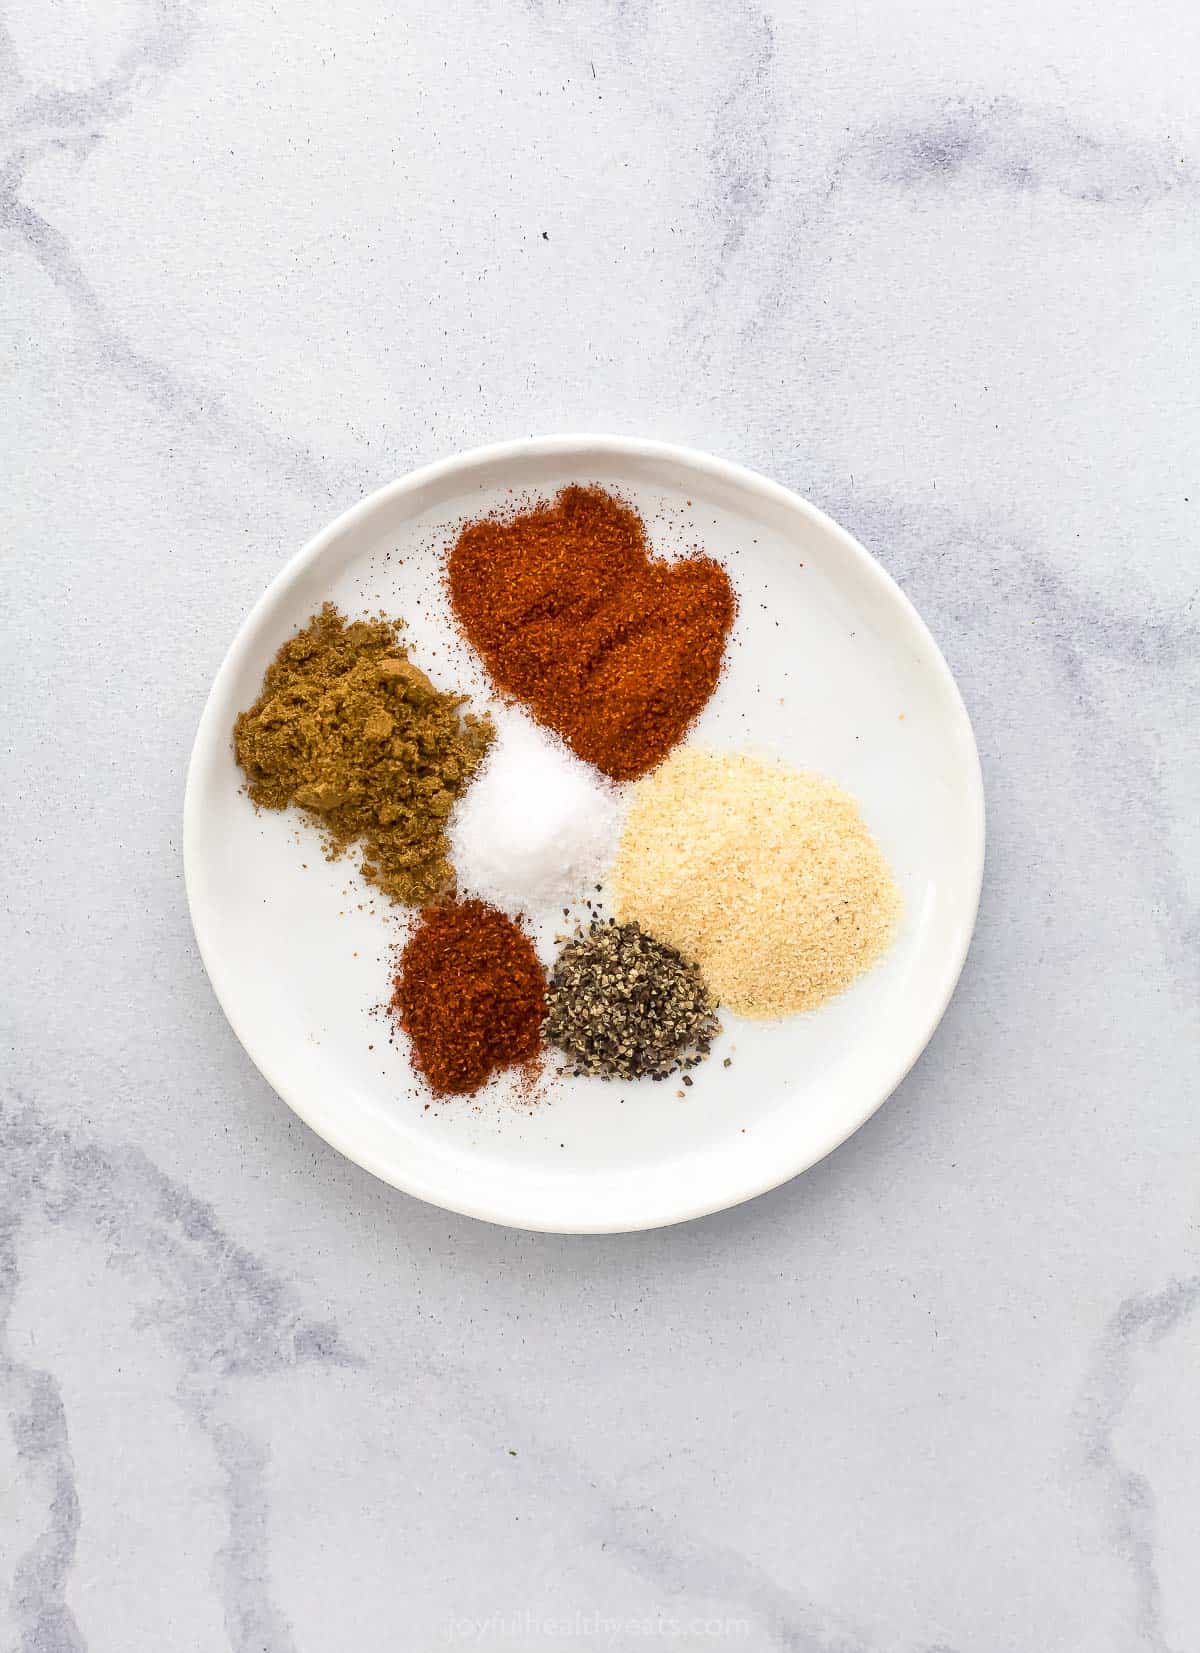 All of the cod seasonings on a small plate on top of a marble surface